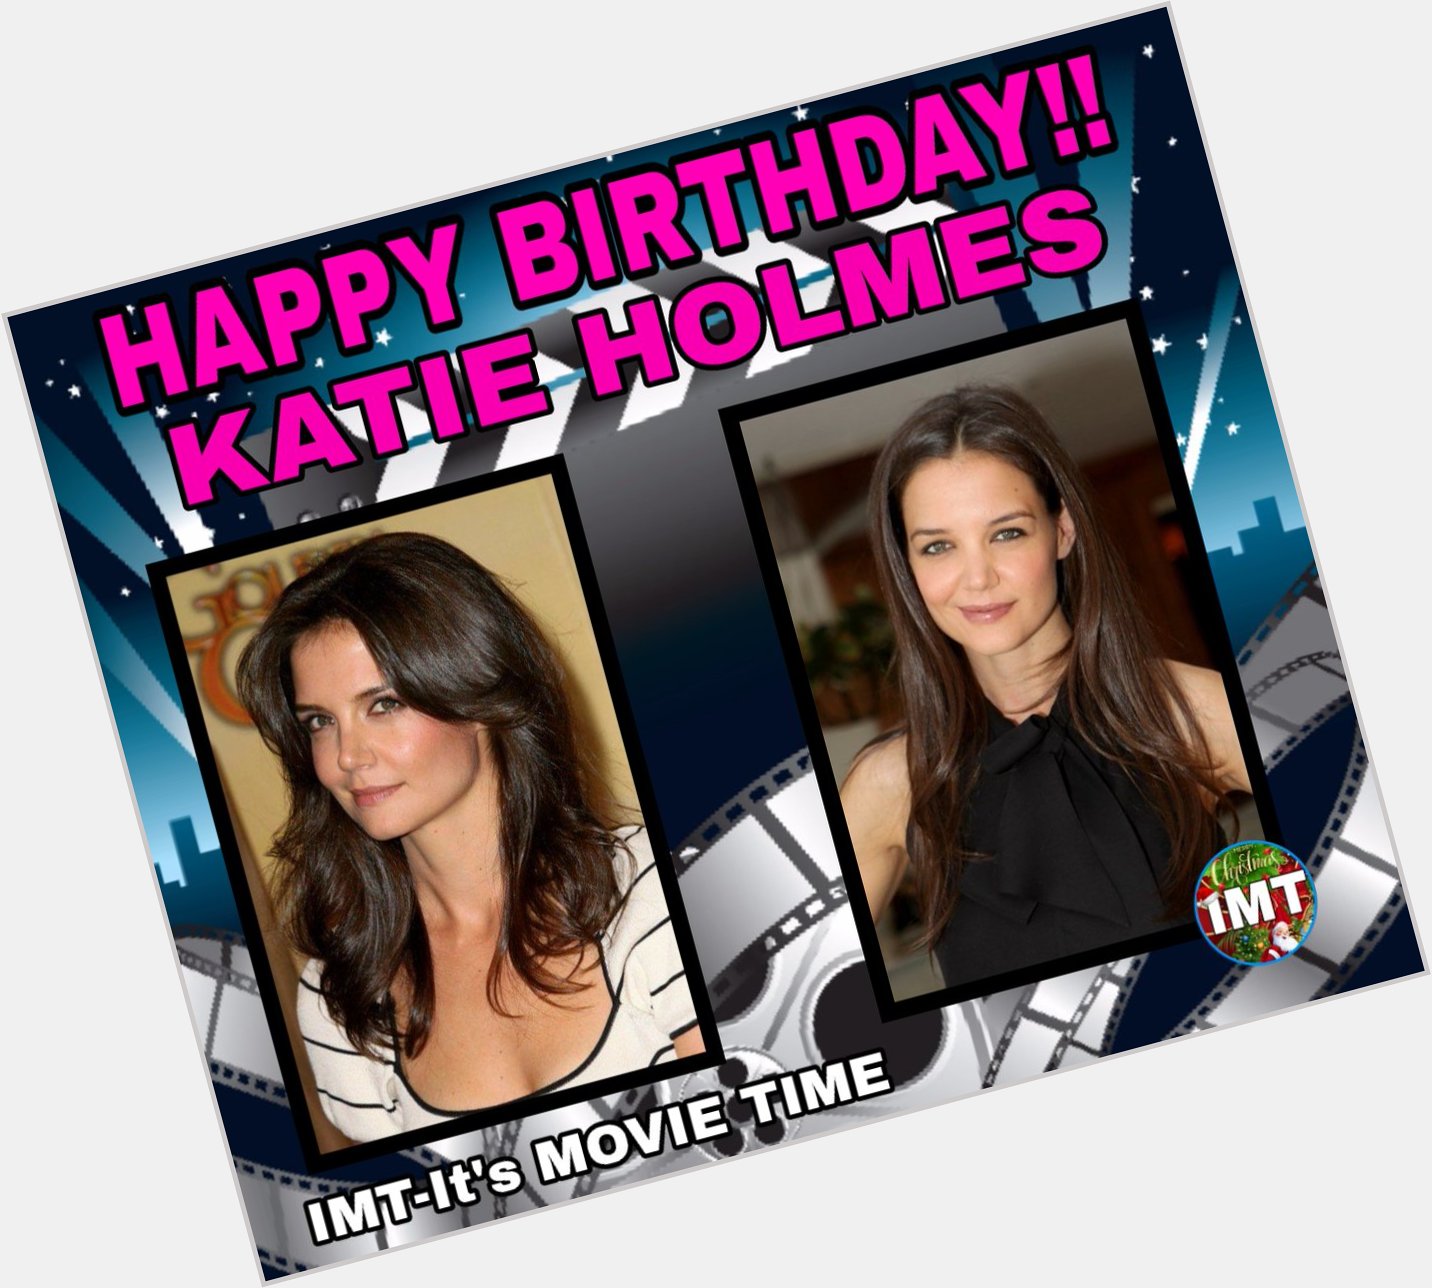 Happy Birthday to the Beautiful Katie Holmes! The actress is celebrating 41 years. 